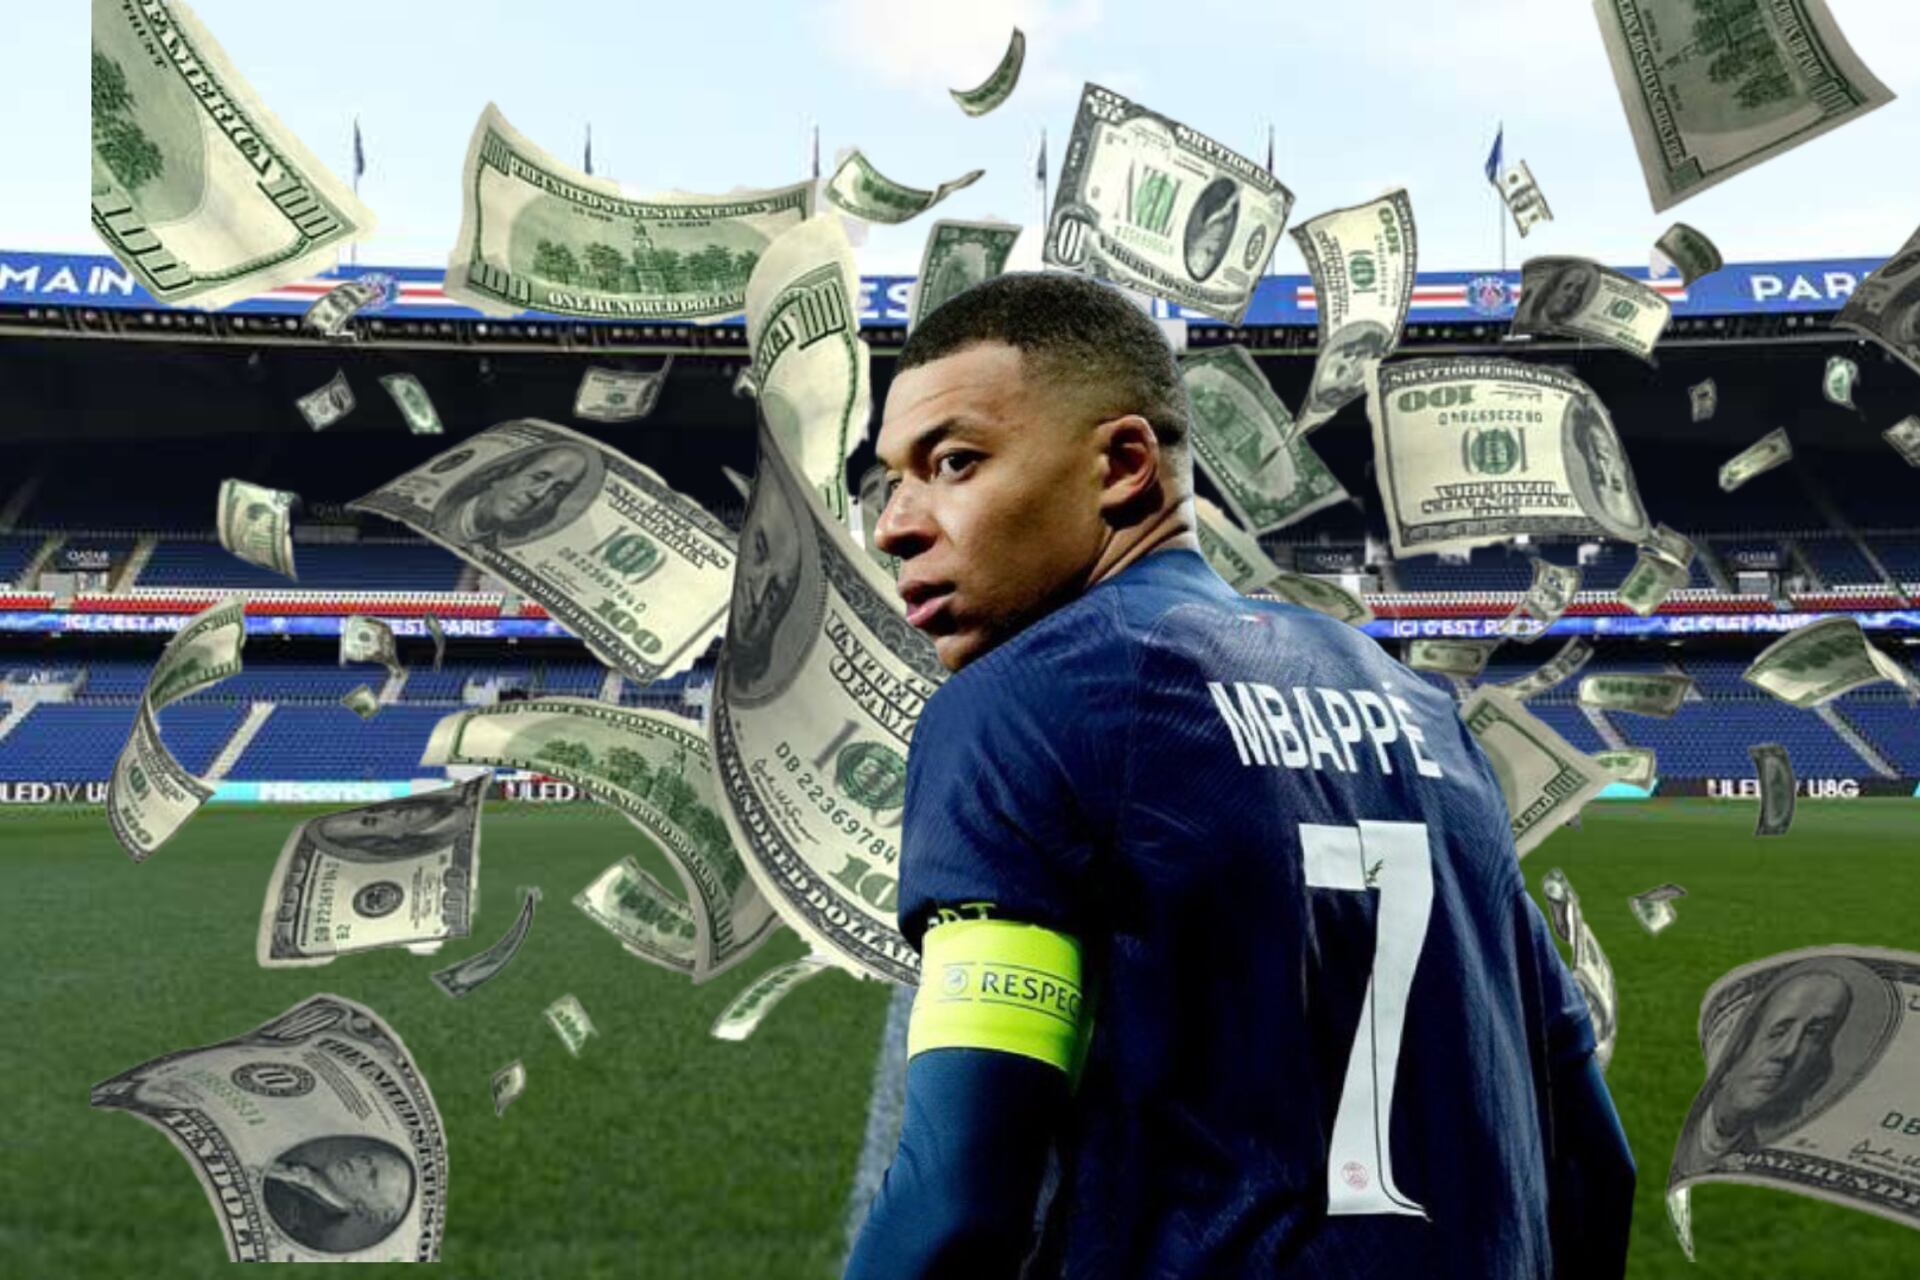 Mbappé makes the most out of top 5 European leagues, his wage compared to others